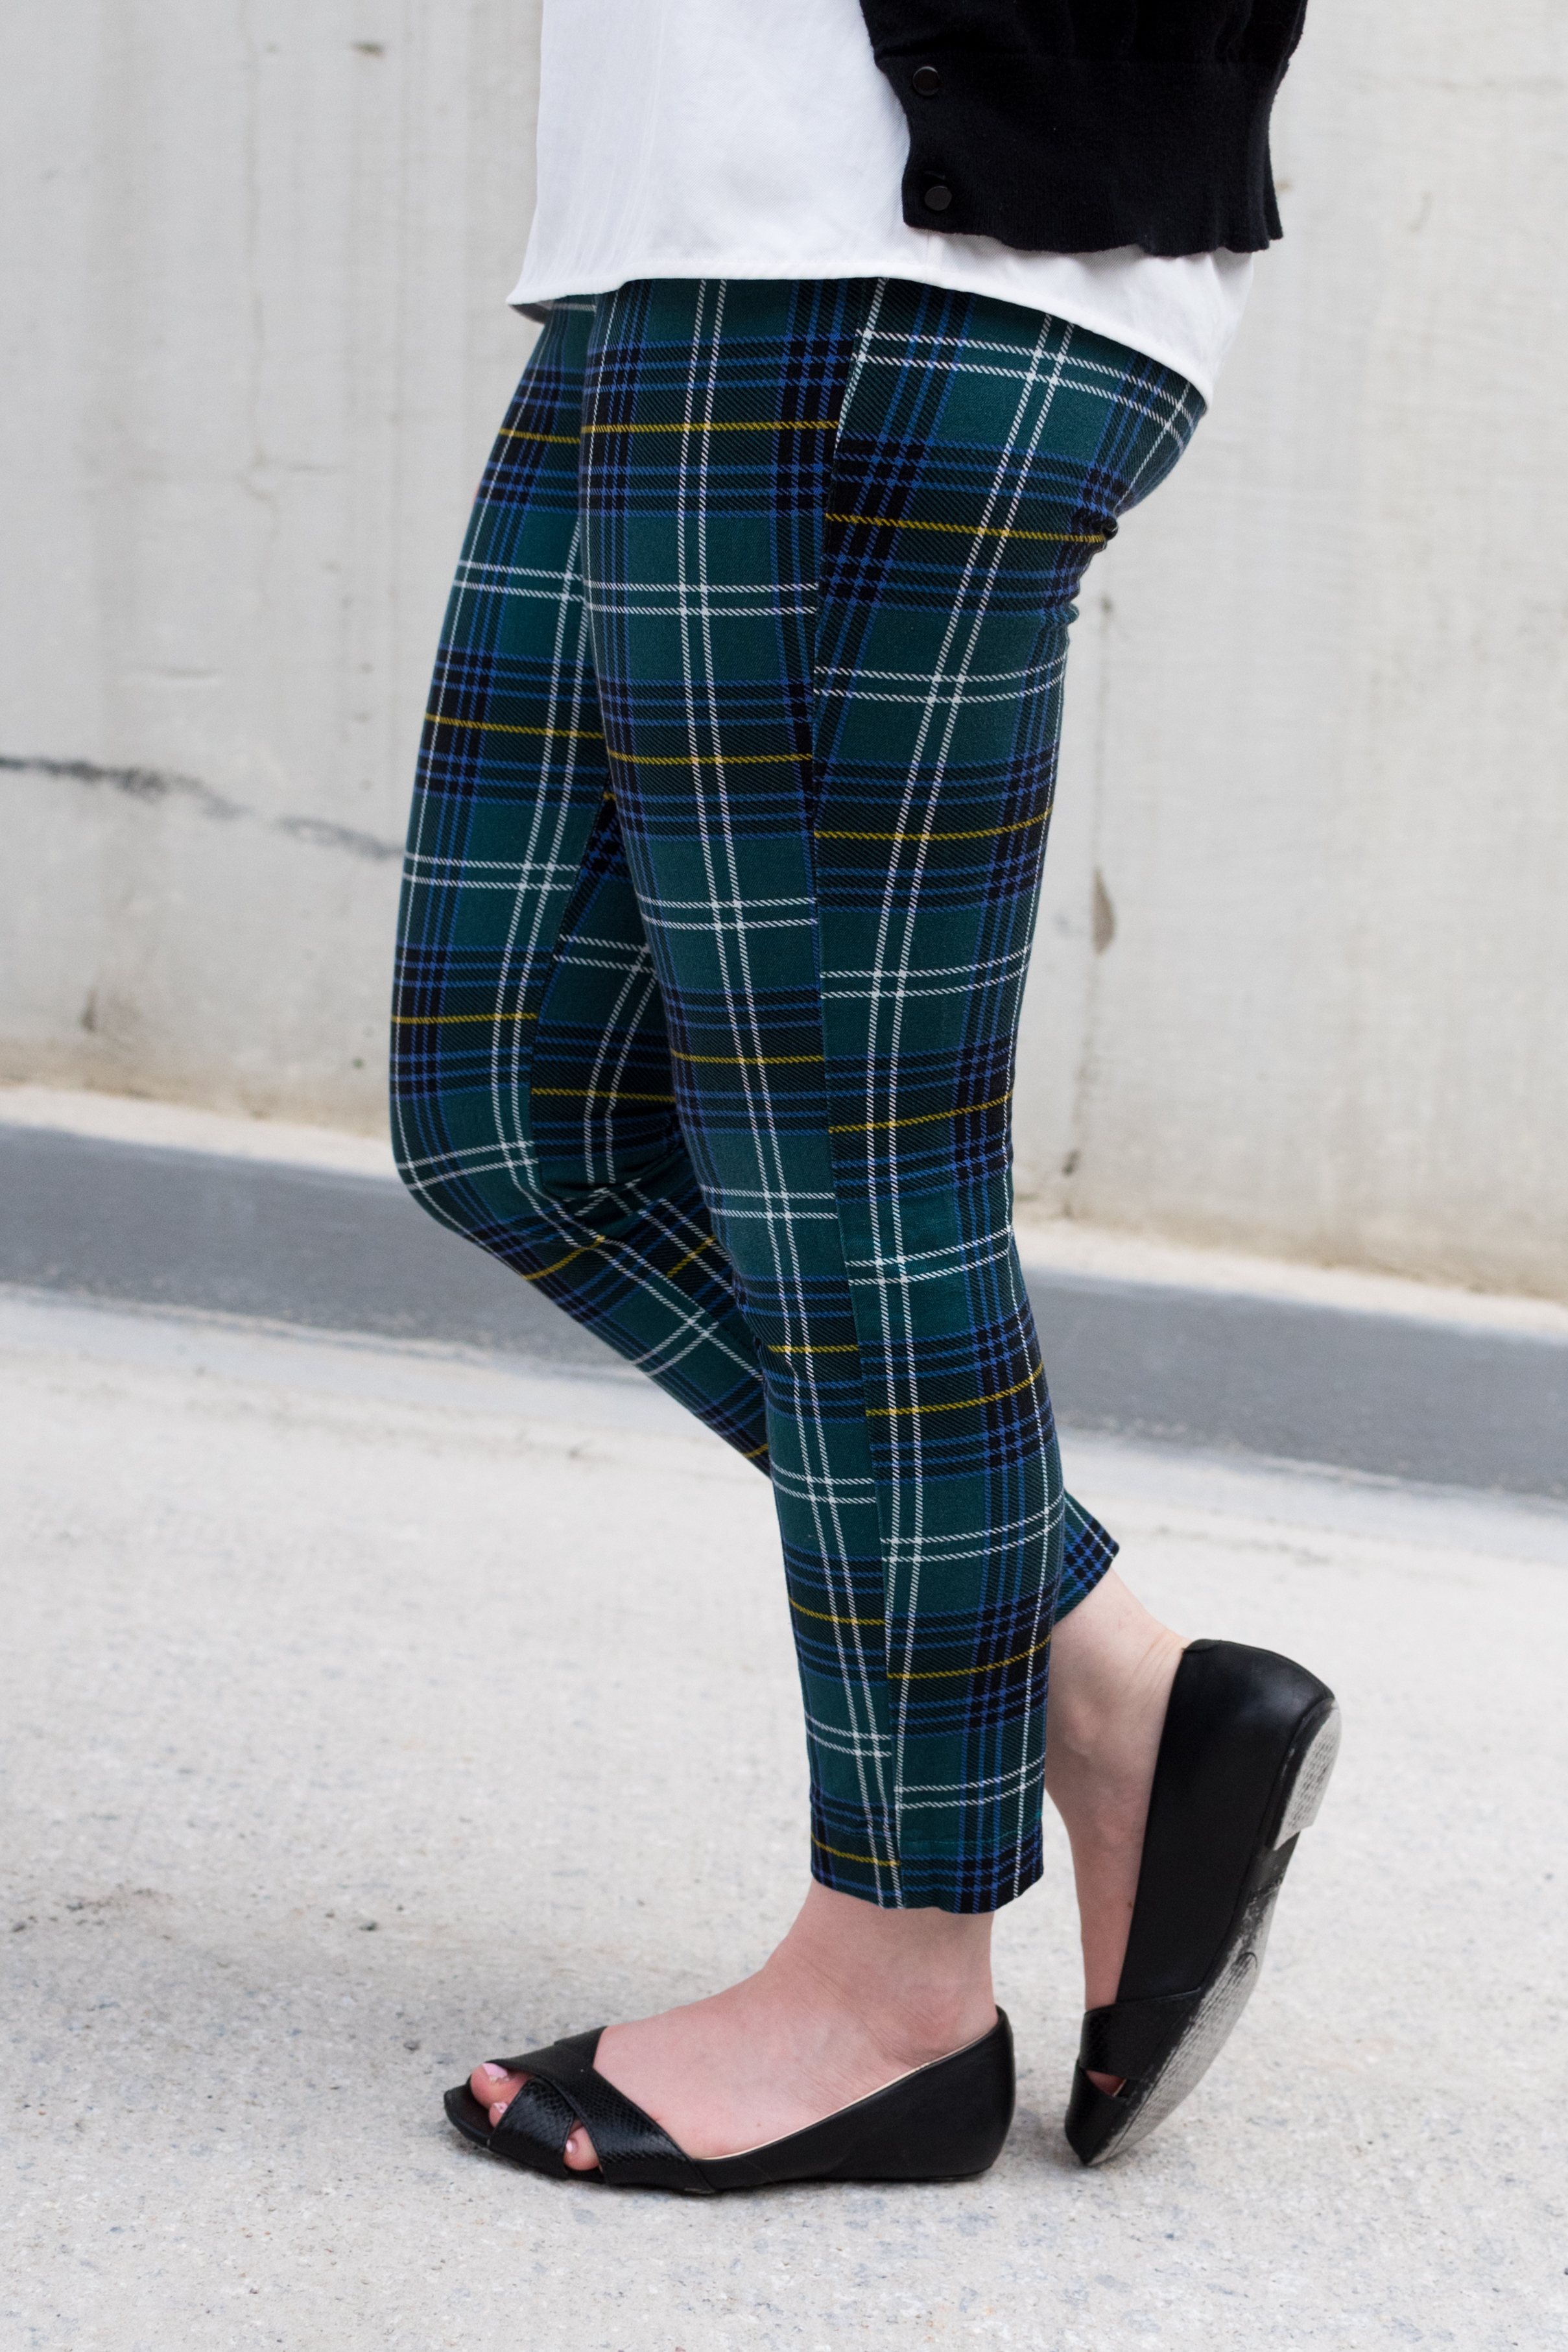 The Summer to Fall Transition | Something Good, @danaerinw , plaid pants, old navy plaid pants, women's fashion